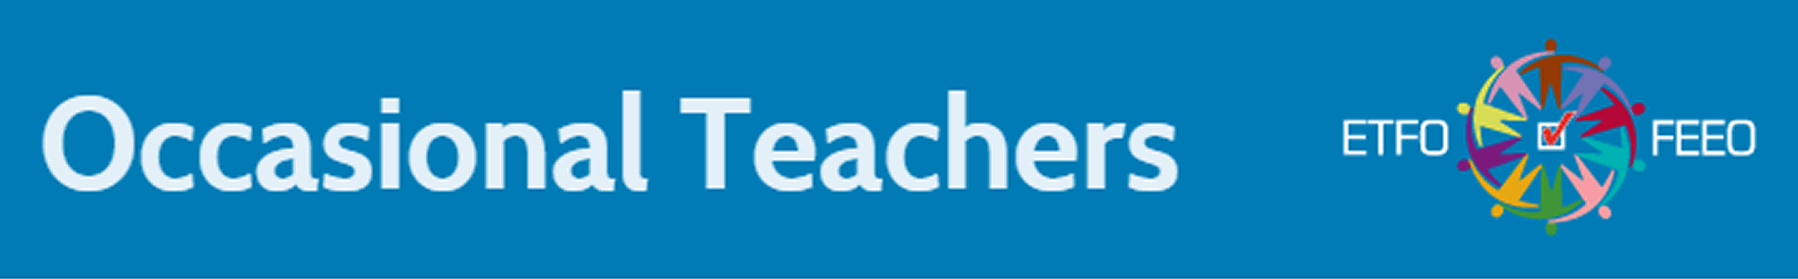 This site contains information that would assist daily occasional teachers as well as long term occasional teachers.